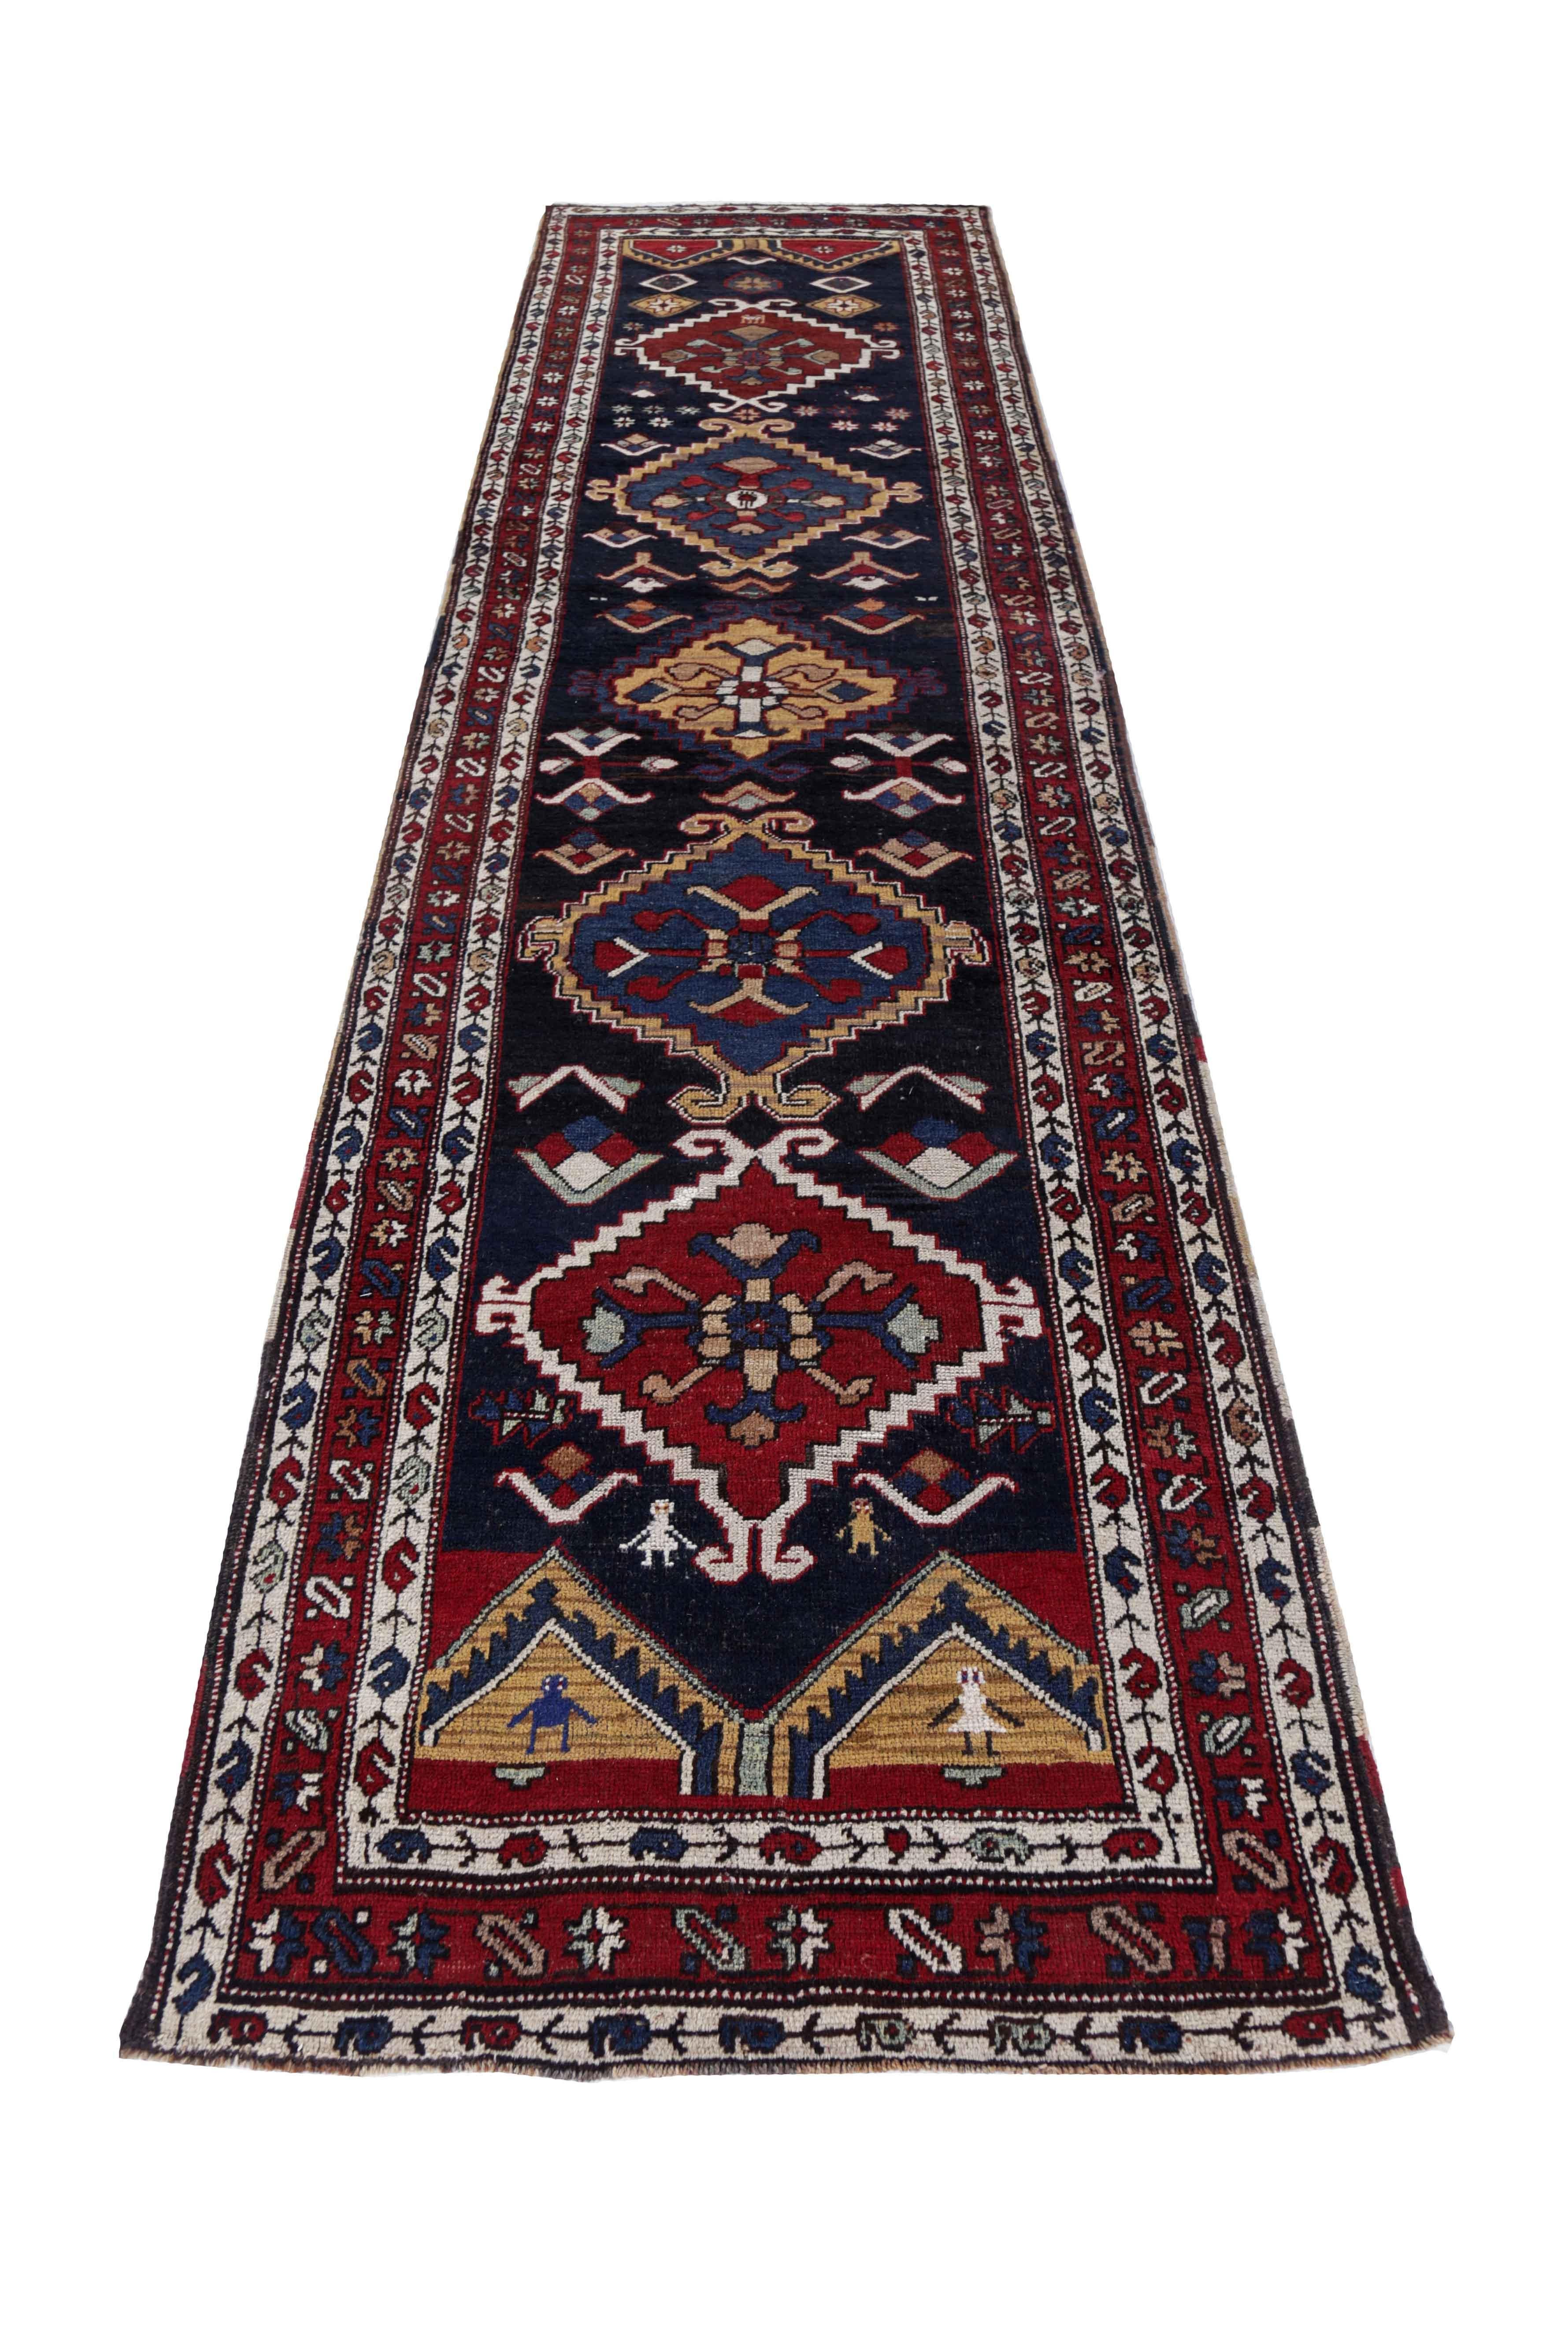 Antique Persian runner rug handwoven from the finest sheep’s wool. It’s colored with all-natural vegetable dyes that are safe for humans and pets. It’s a traditional Azerbaijan design handwoven by expert artisans. It’s a lovely runner rug that can